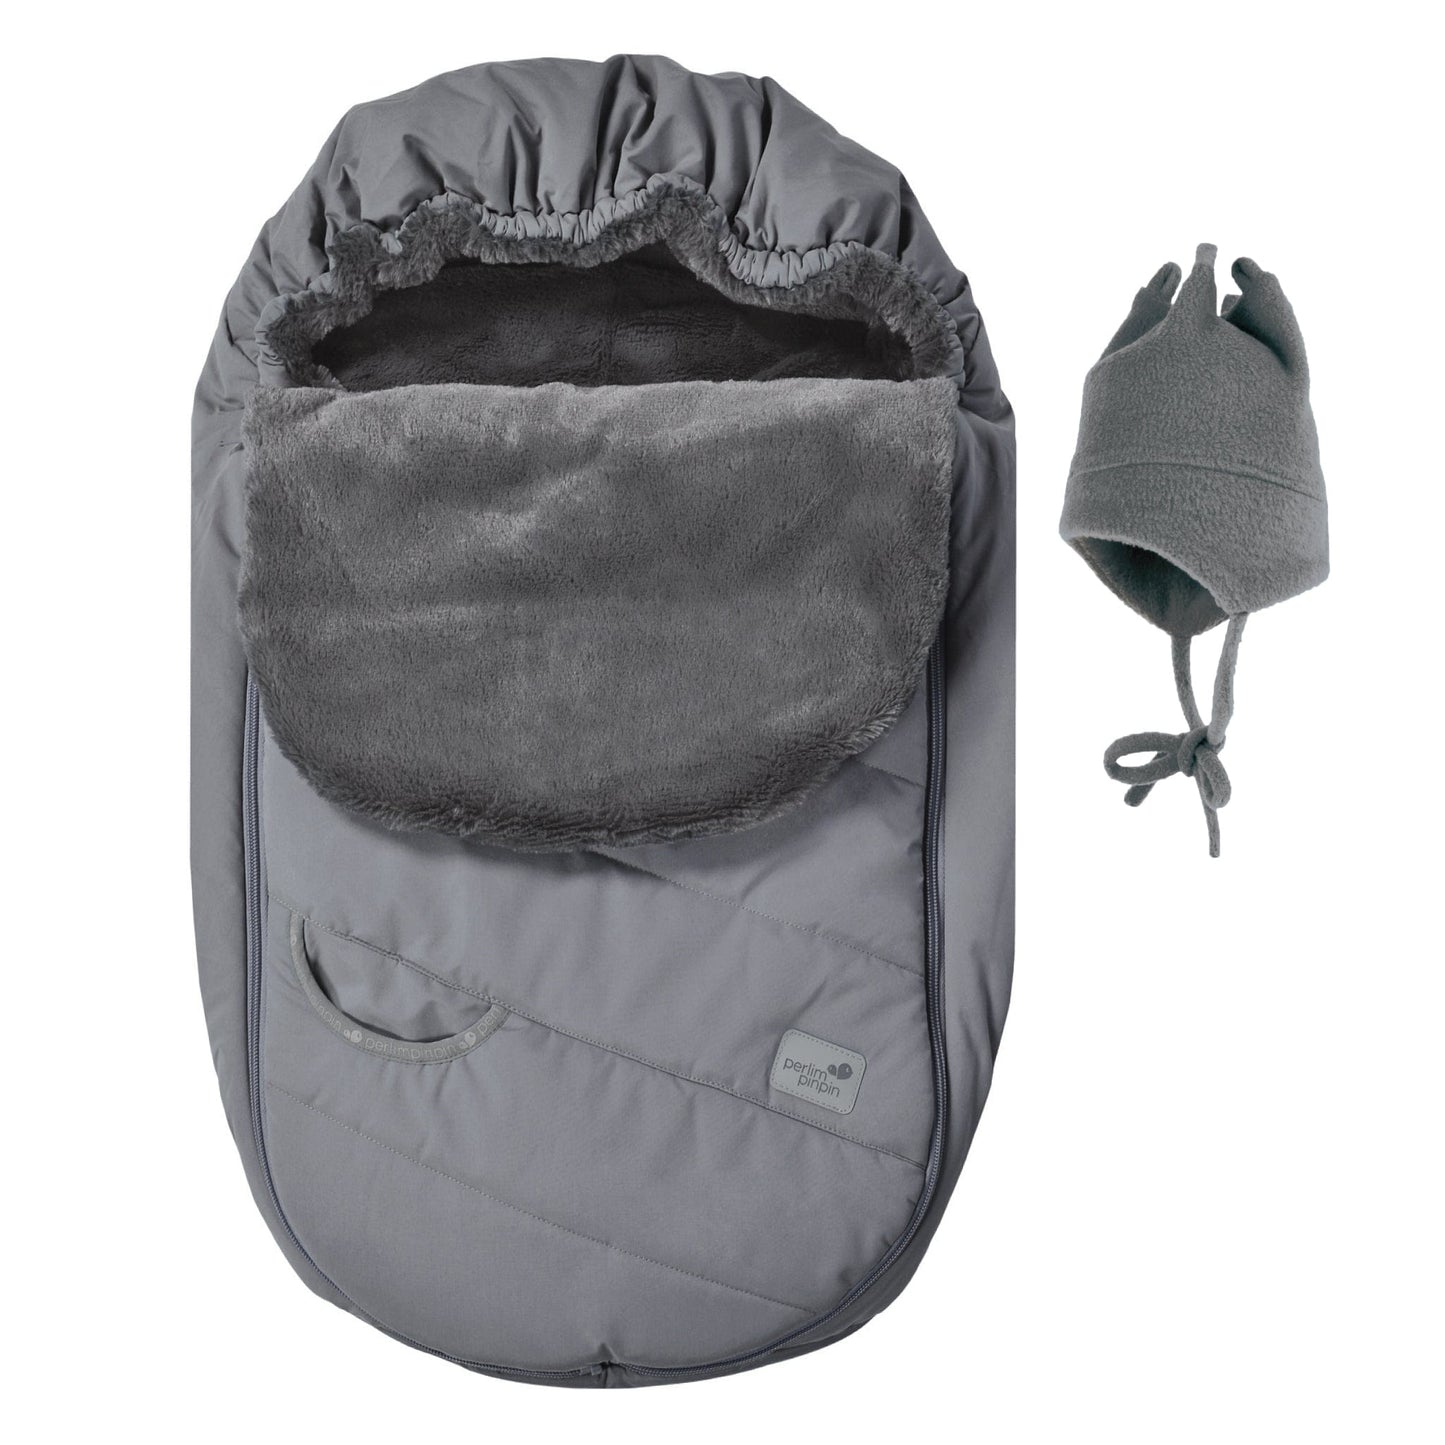 Baby car seat cover for winter - Gray